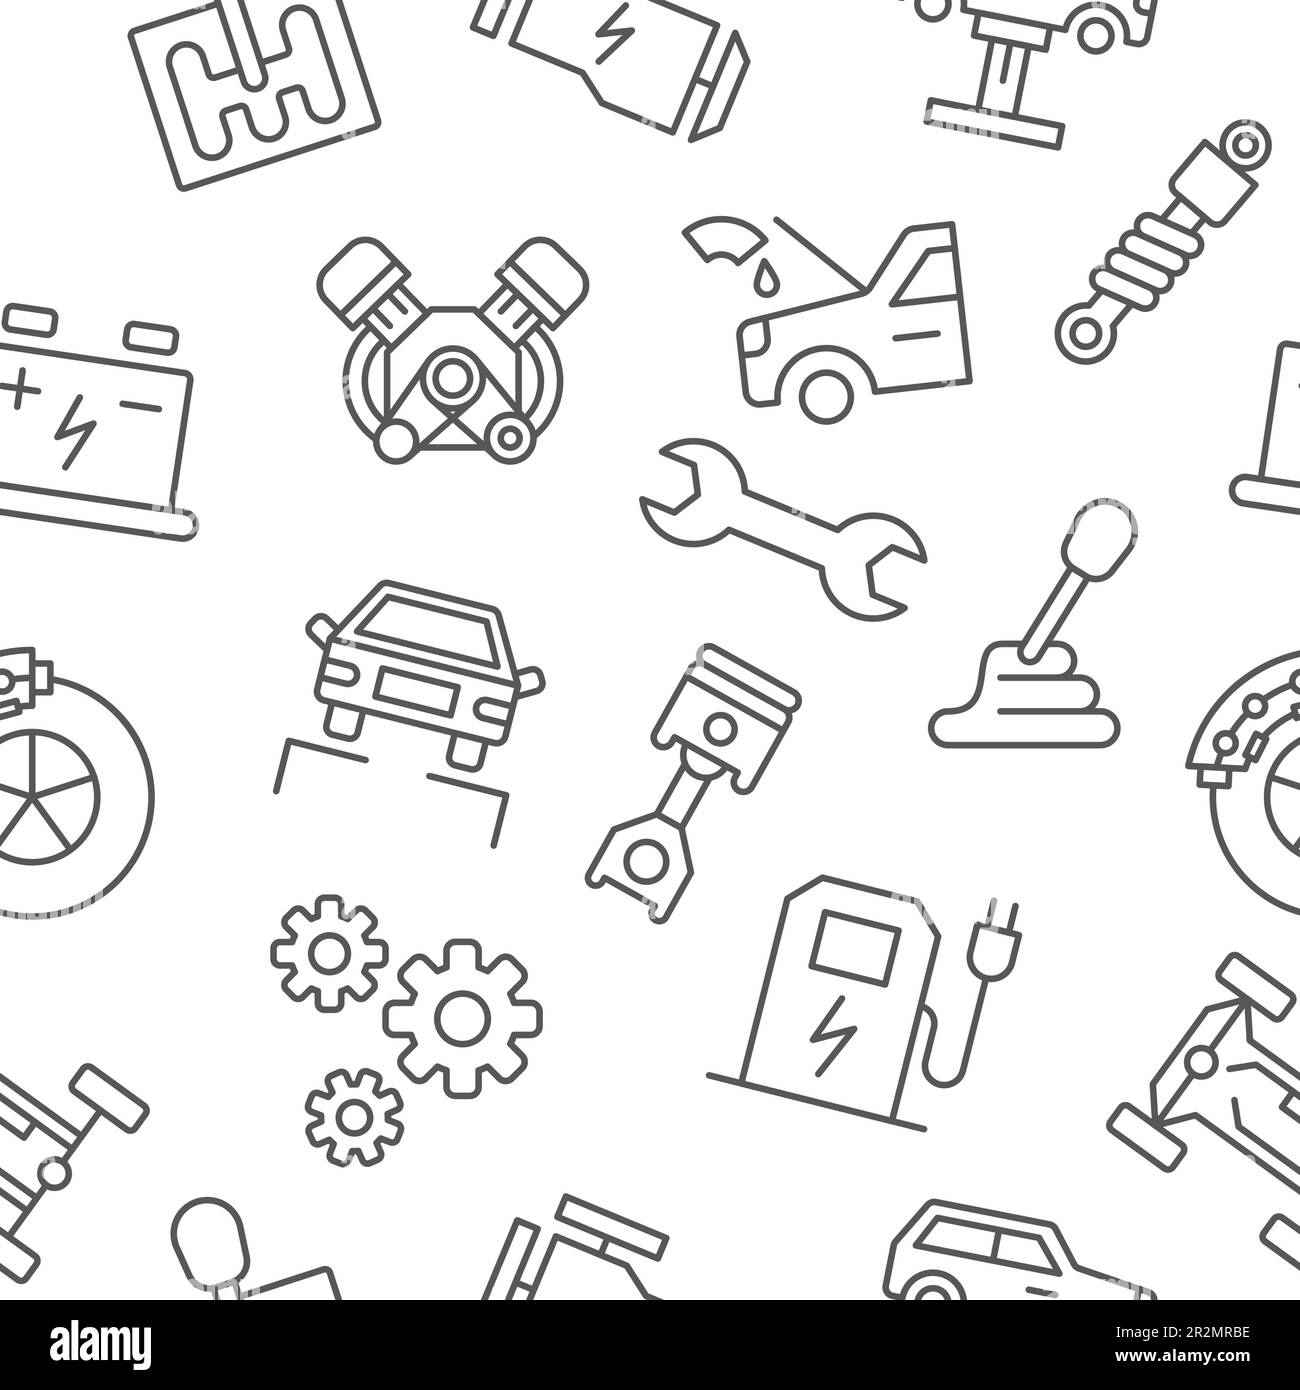 Car repair. Auto service pattern. Mechanic tool icons for shop or garage. Vehicle fix maintenance. Automotive workshop. Spare equipment. Wrench and ge Stock Vector